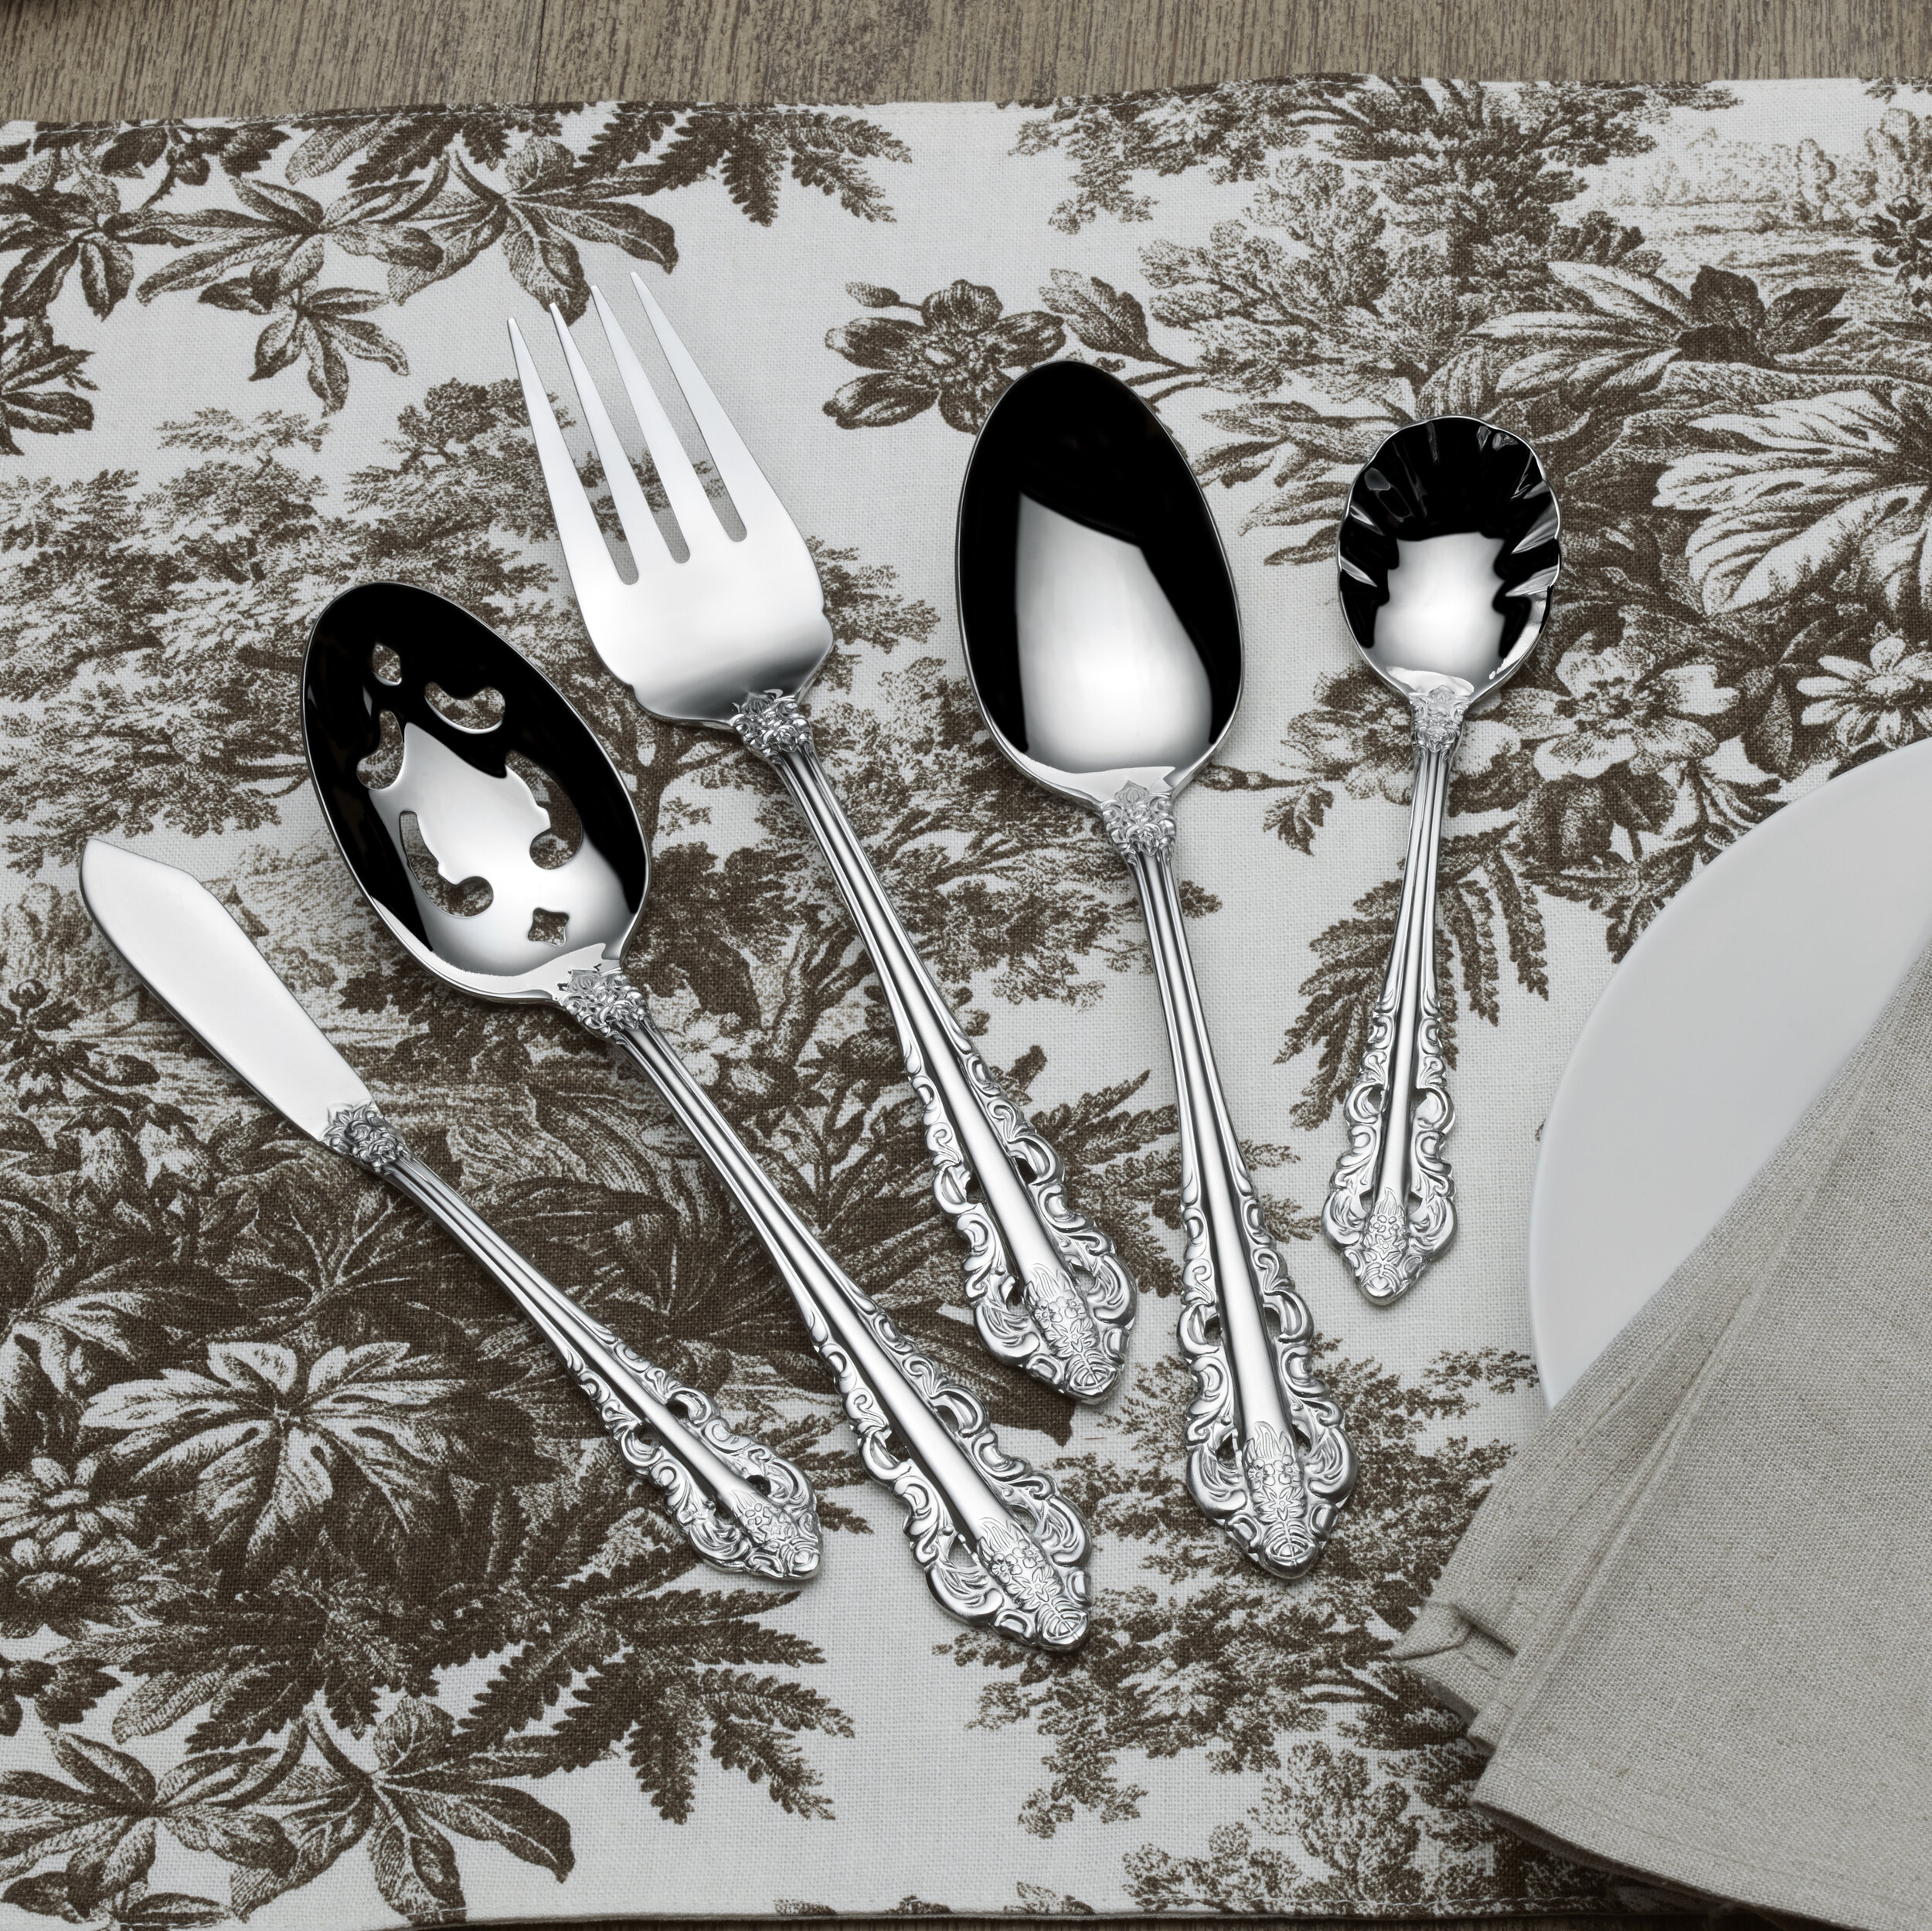 4 FORKS 6 7/8 LONG Flatware Wallace RESPLENDENCE Stainless Glossy Silverware,